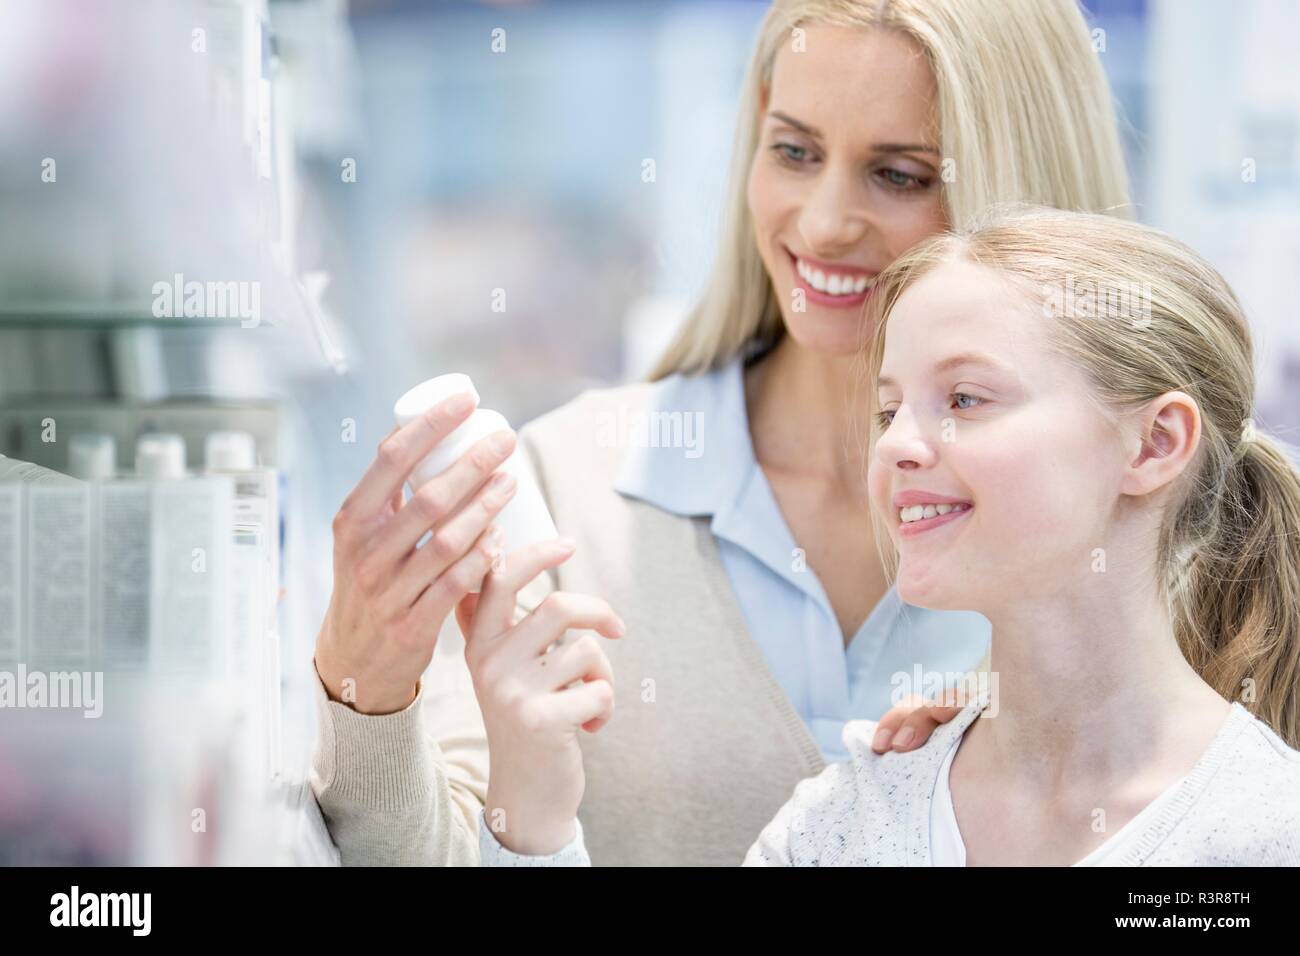 Woman and girl reading label en pharmacie. Banque D'Images